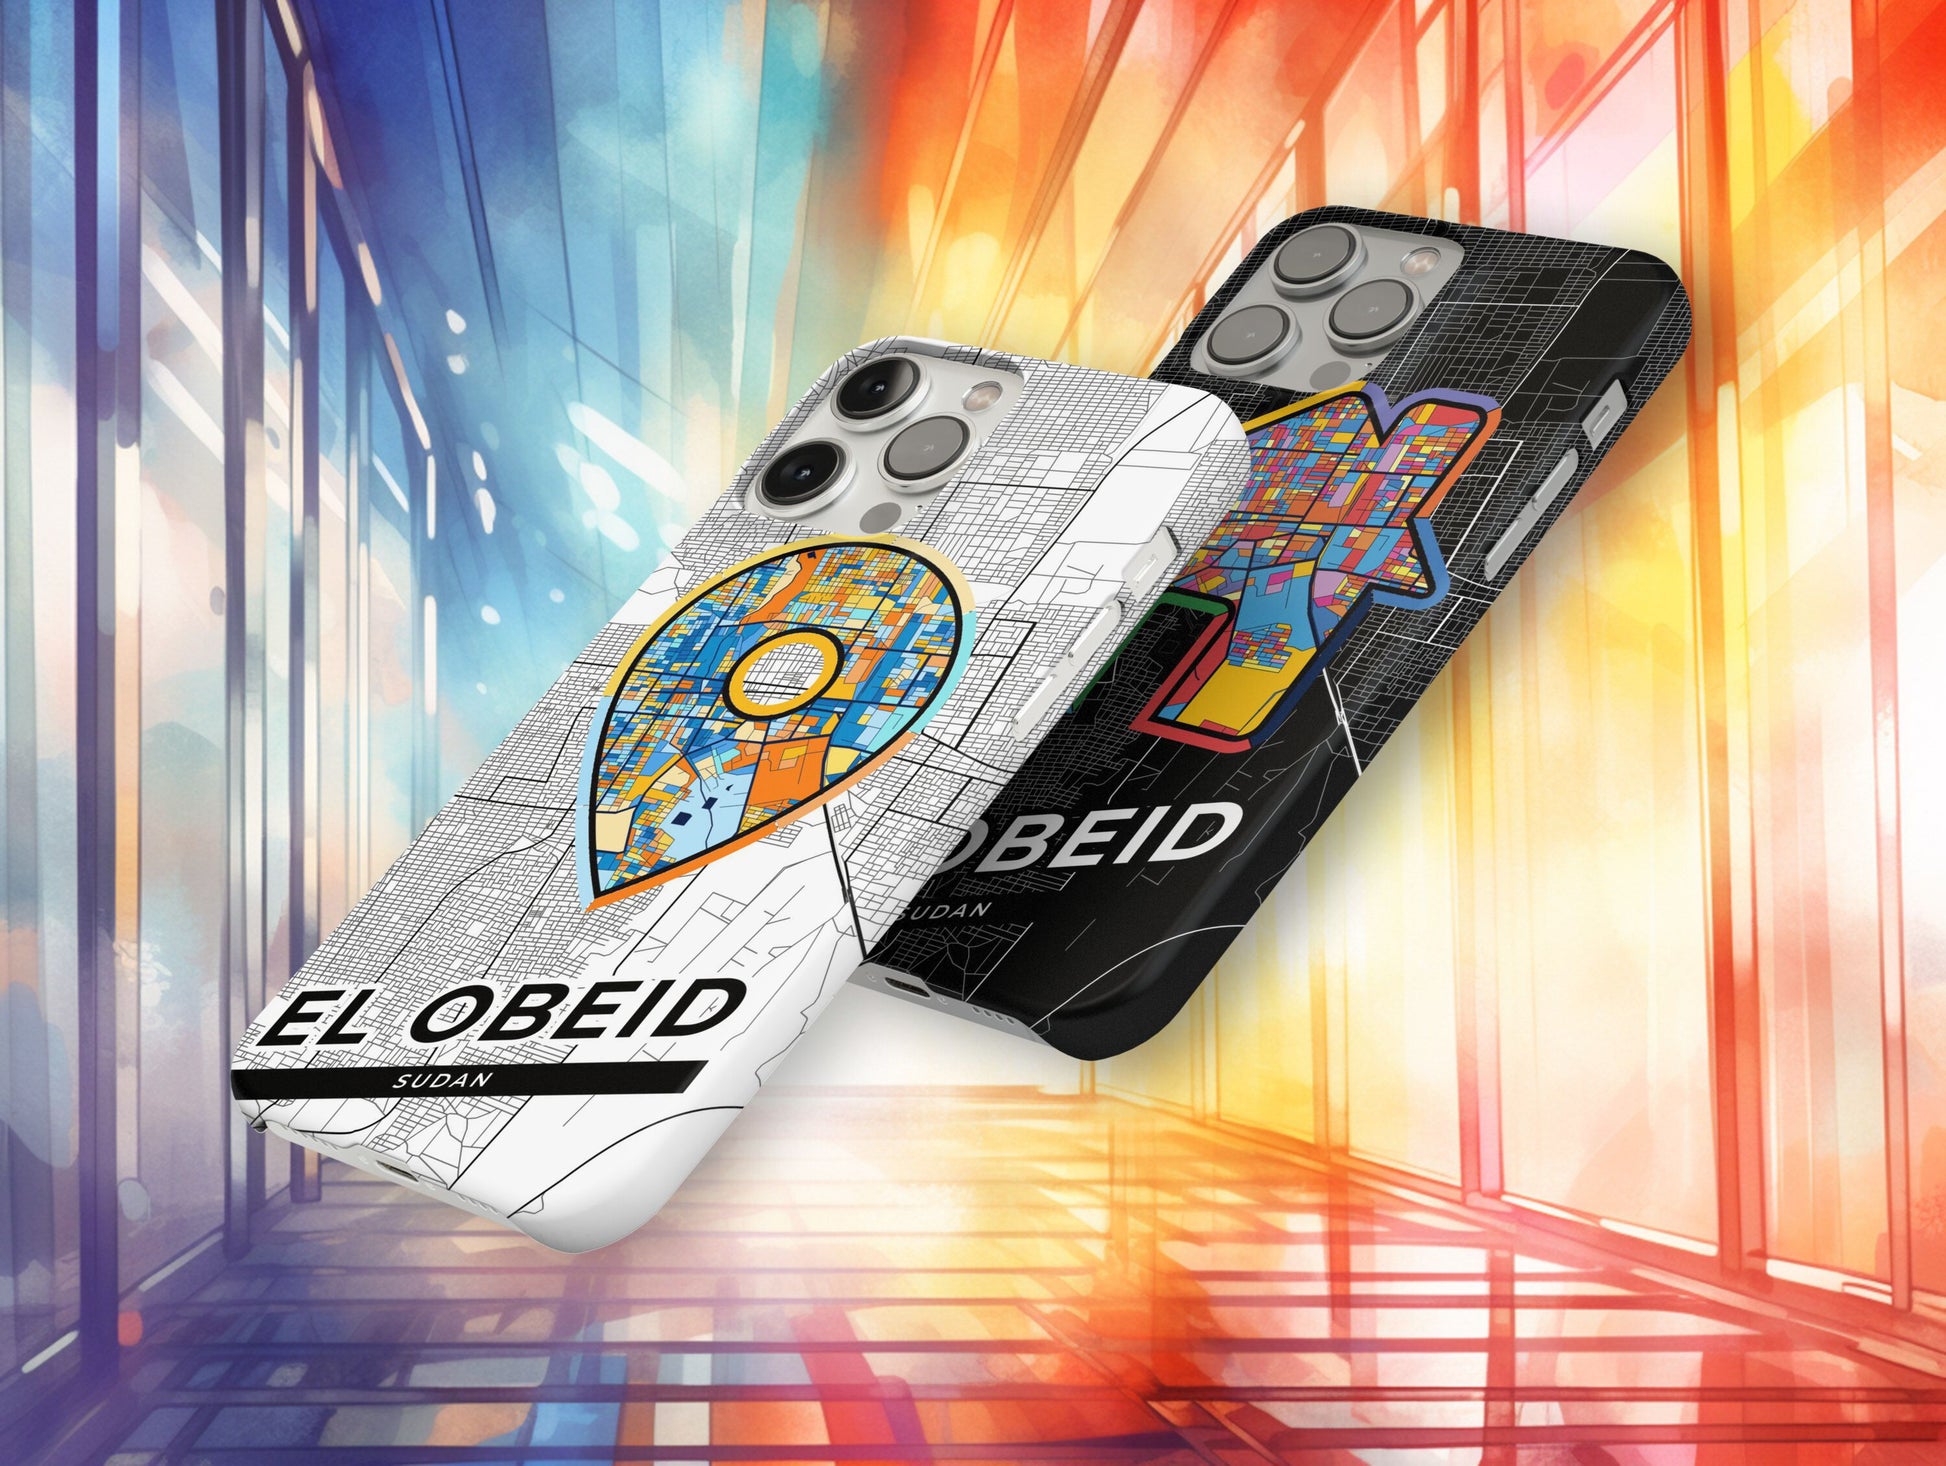 El Obeid Sudan slim phone case with colorful icon. Birthday, wedding or housewarming gift. Couple match cases.